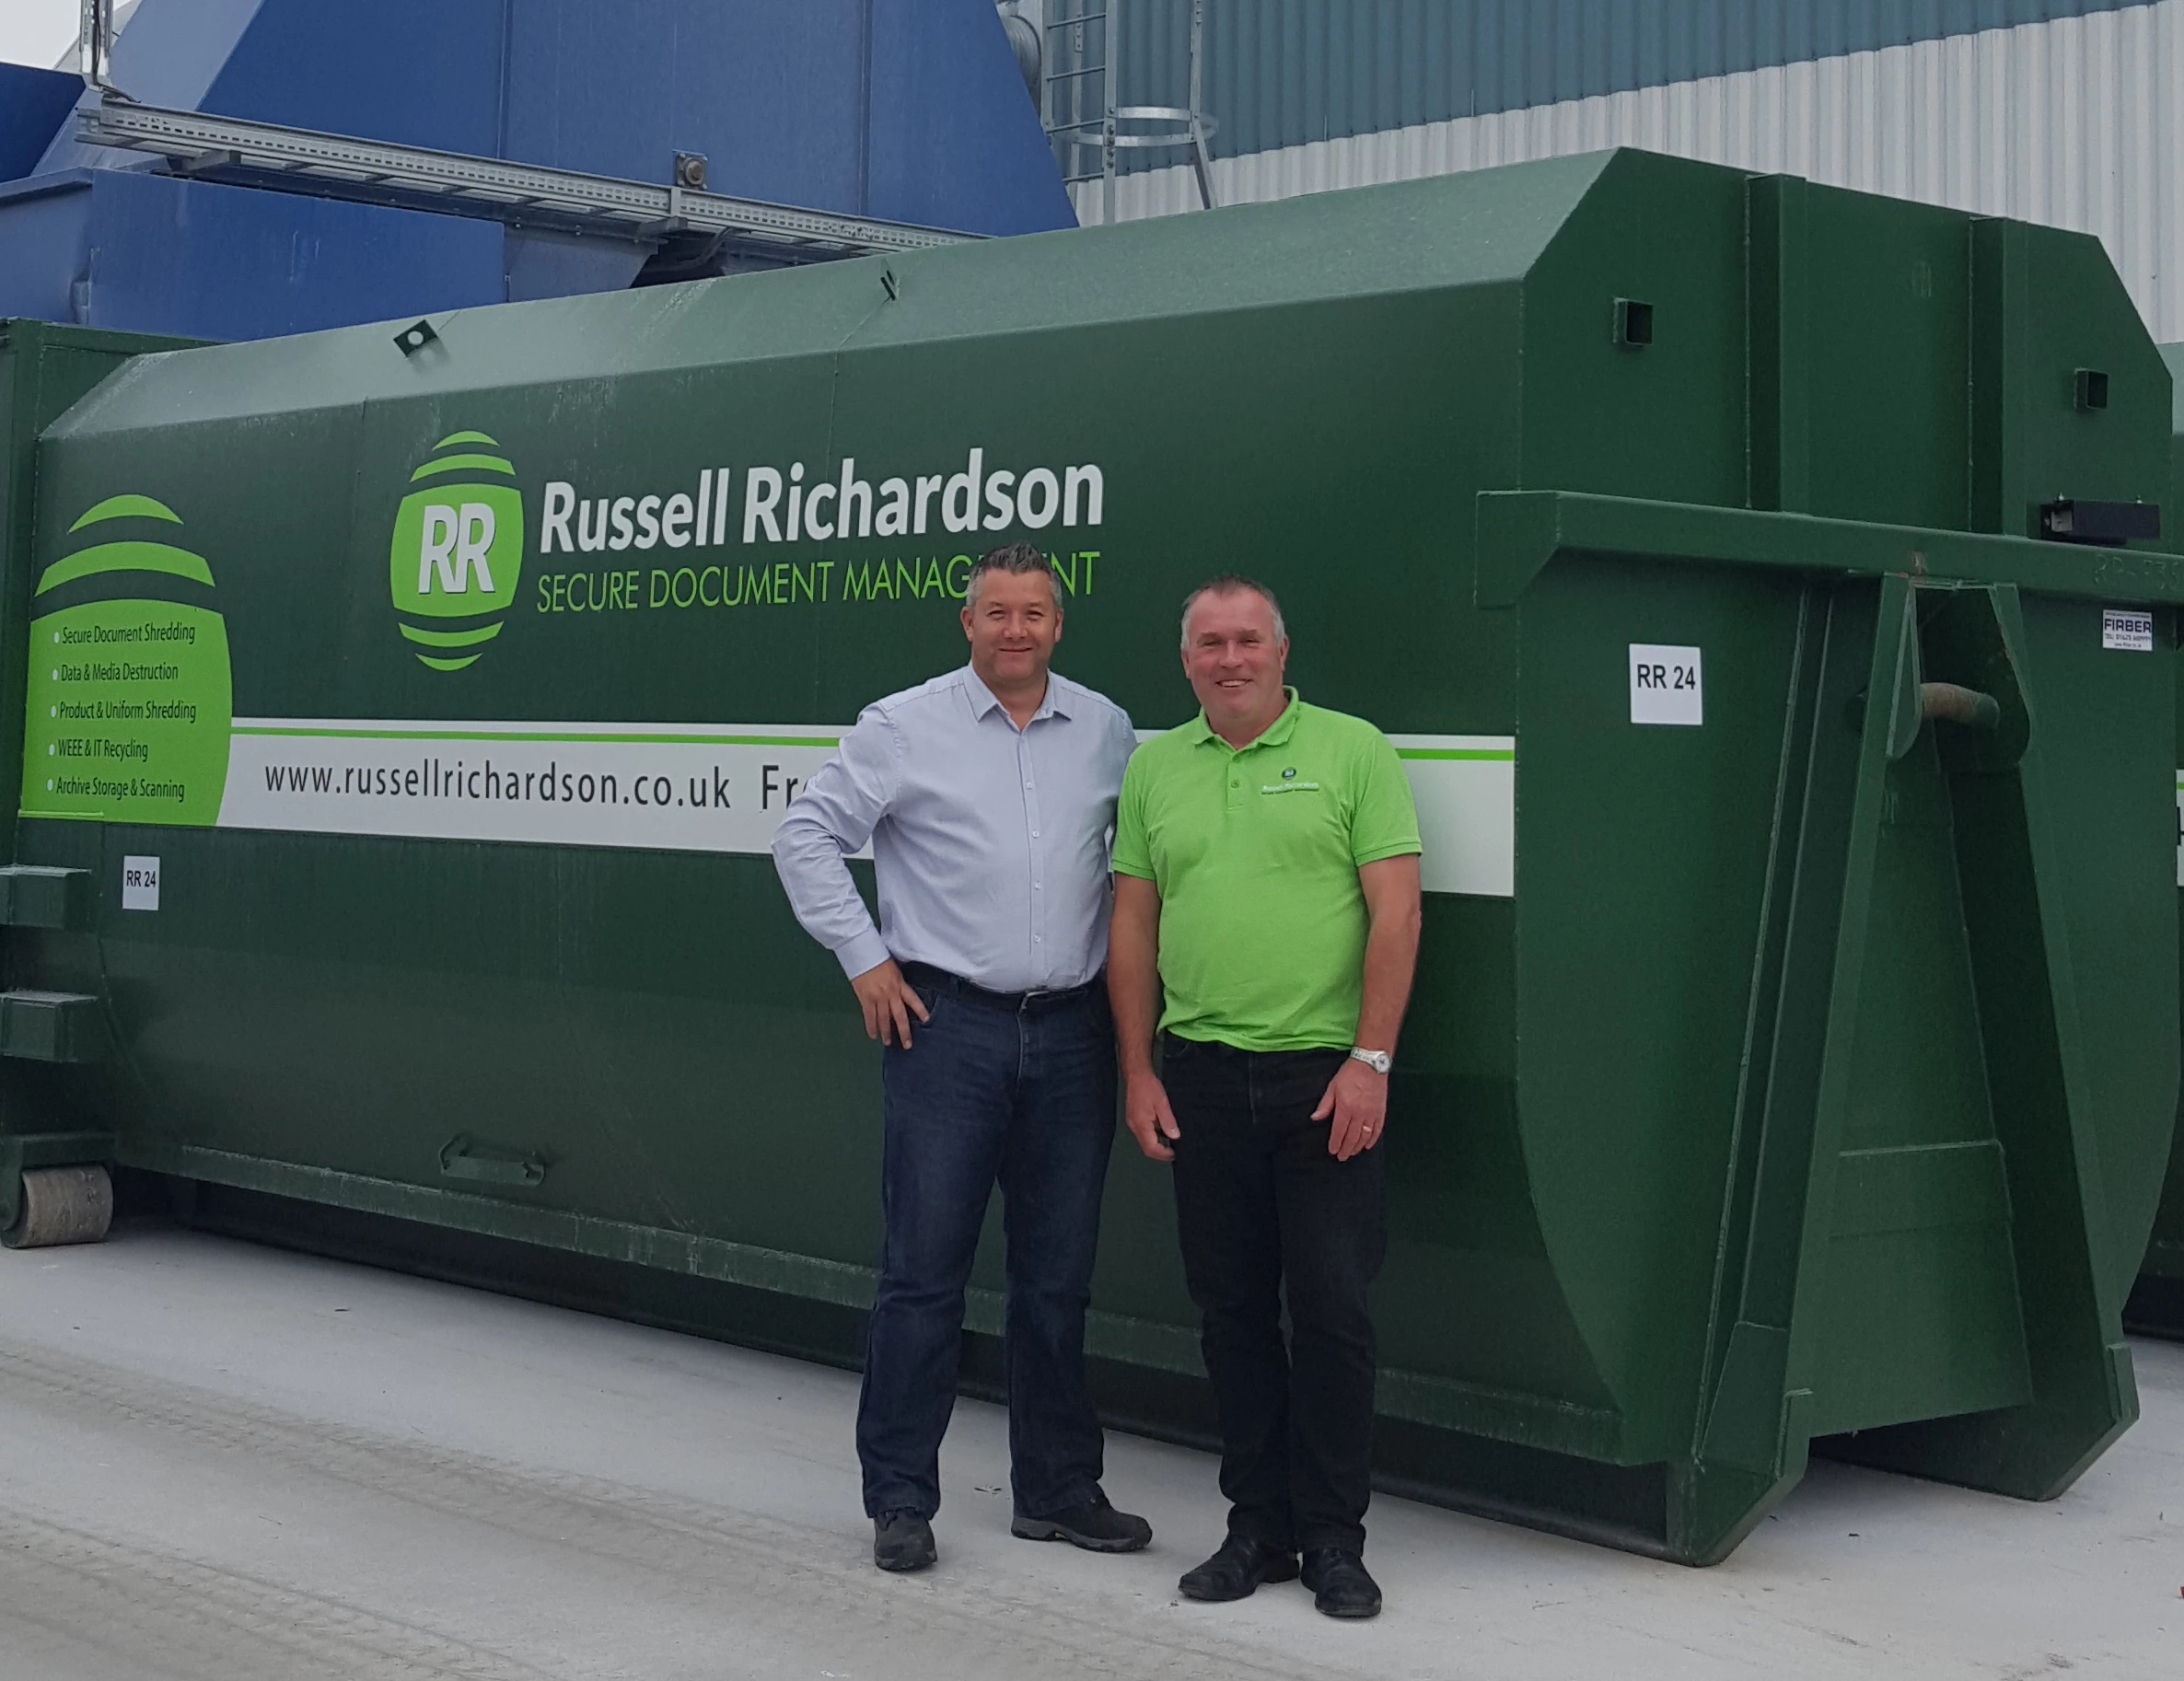 Phil Mott, Bluetree Group supply chain manager, left, with Russell Richardson MD Jonathan Richardson